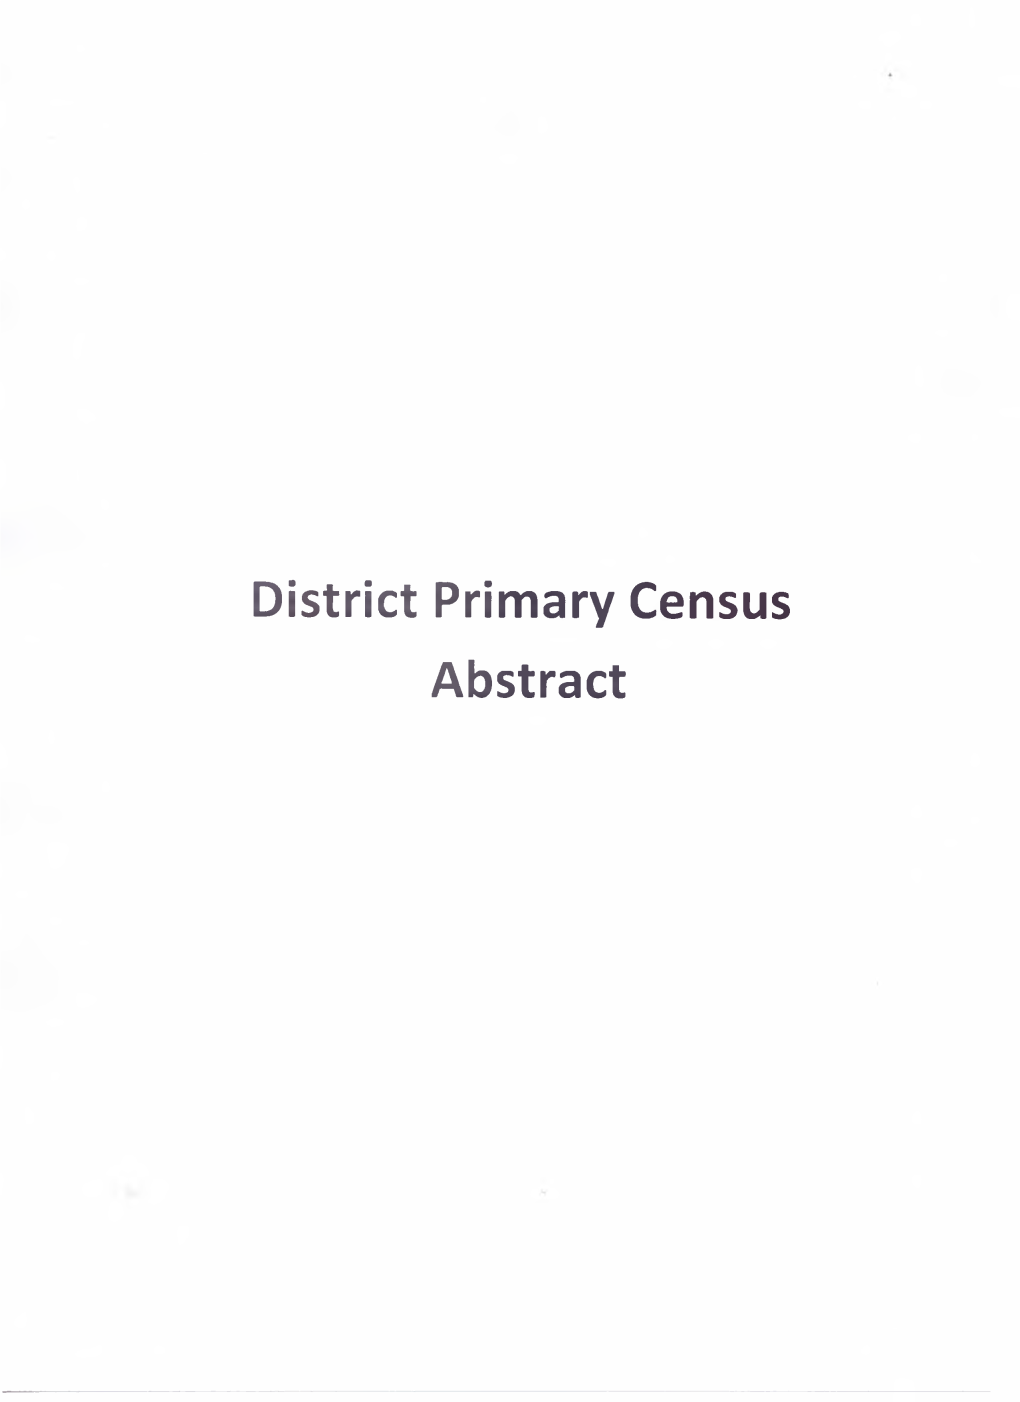 District Primary Census Abstract